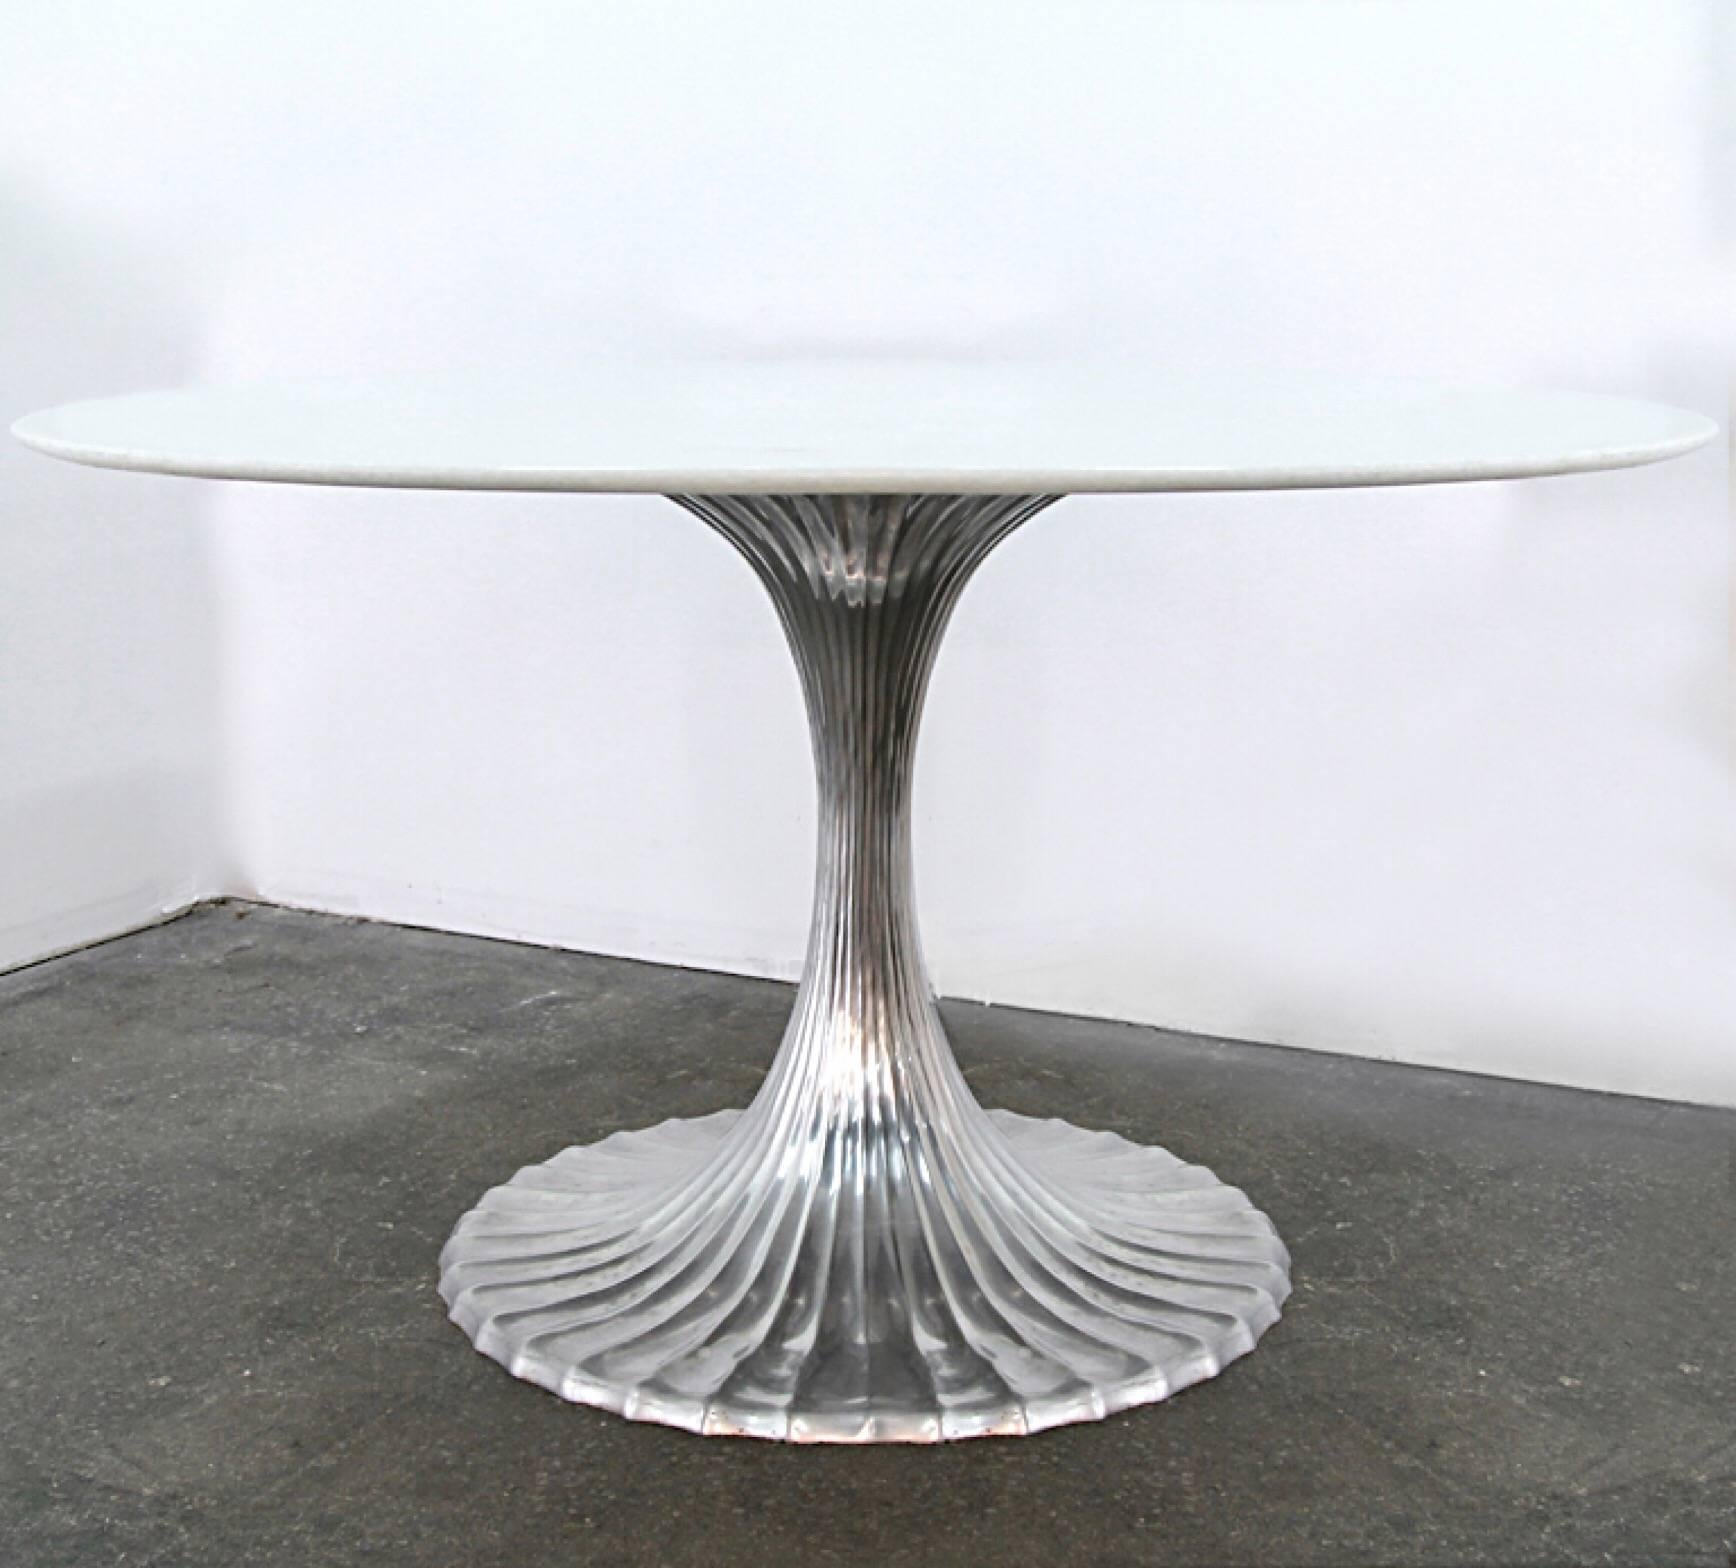 Rare 54 inch round Thassos marble table with flute silver base. A true statement piece.